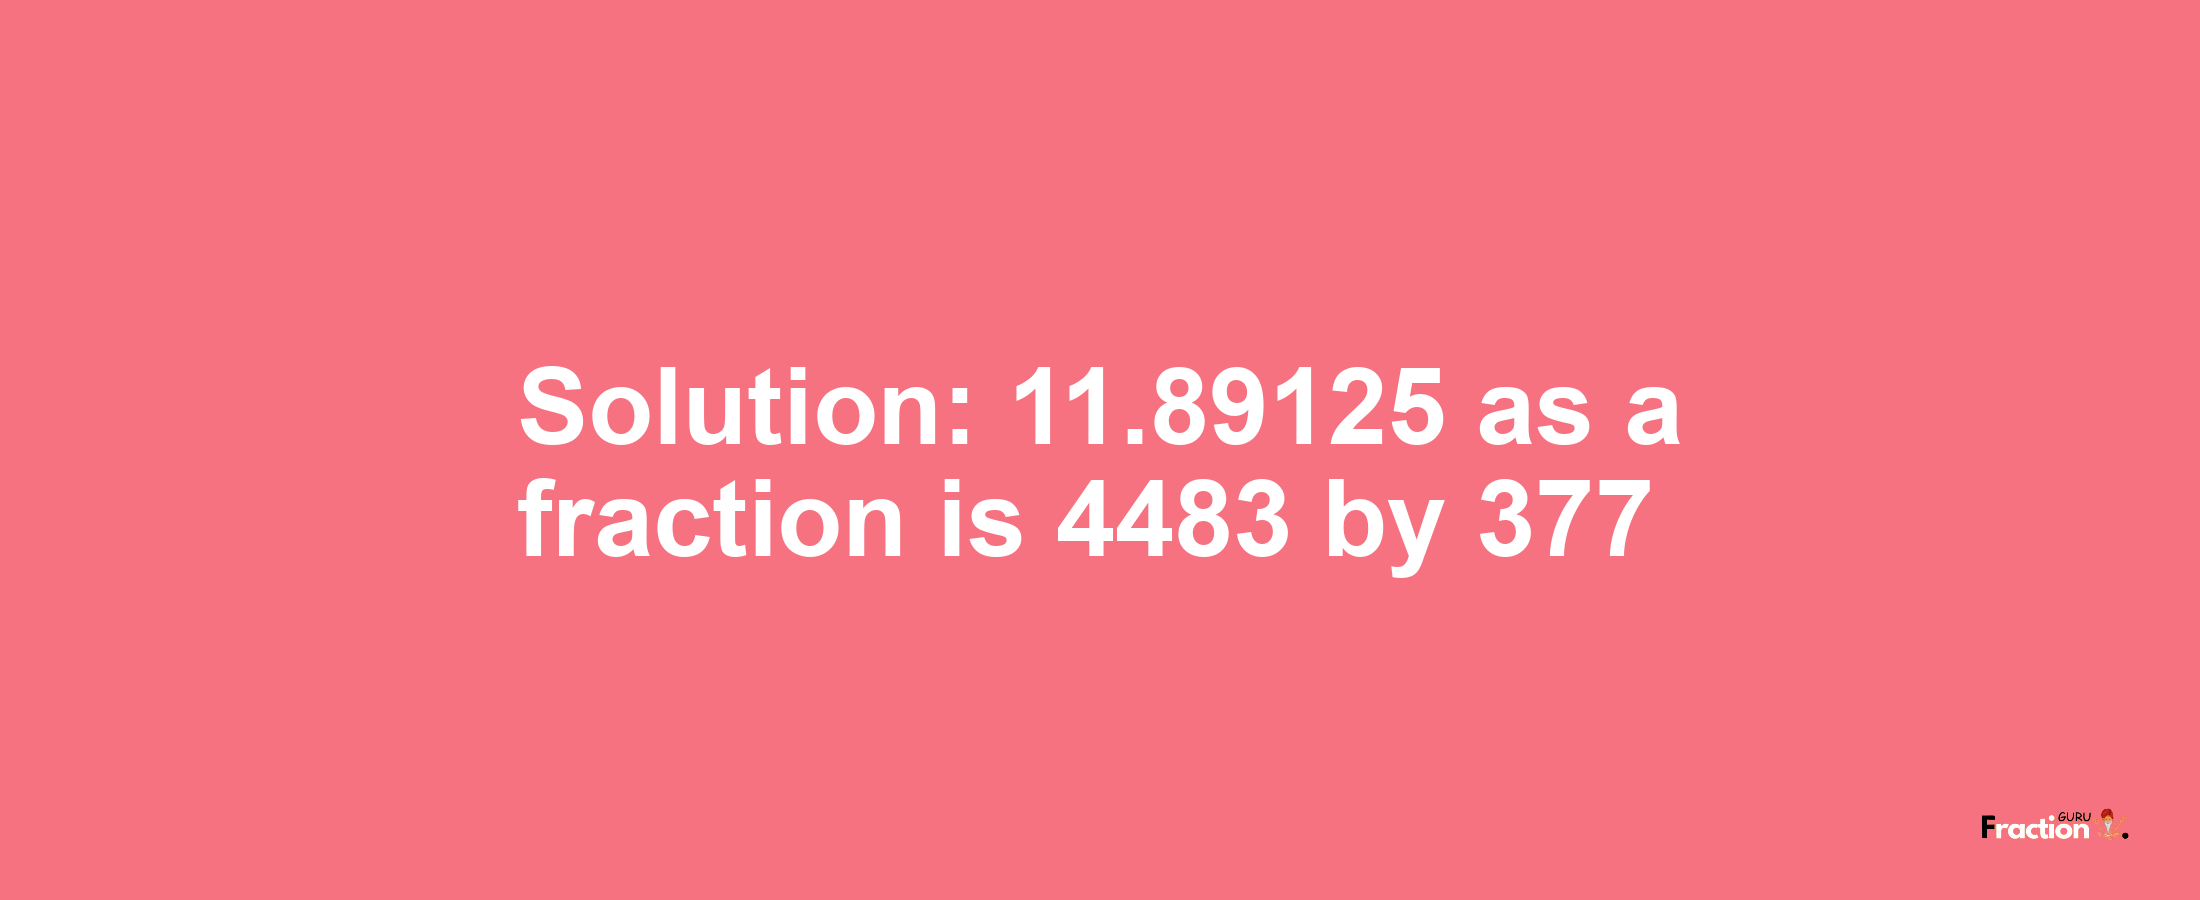 Solution:11.89125 as a fraction is 4483/377